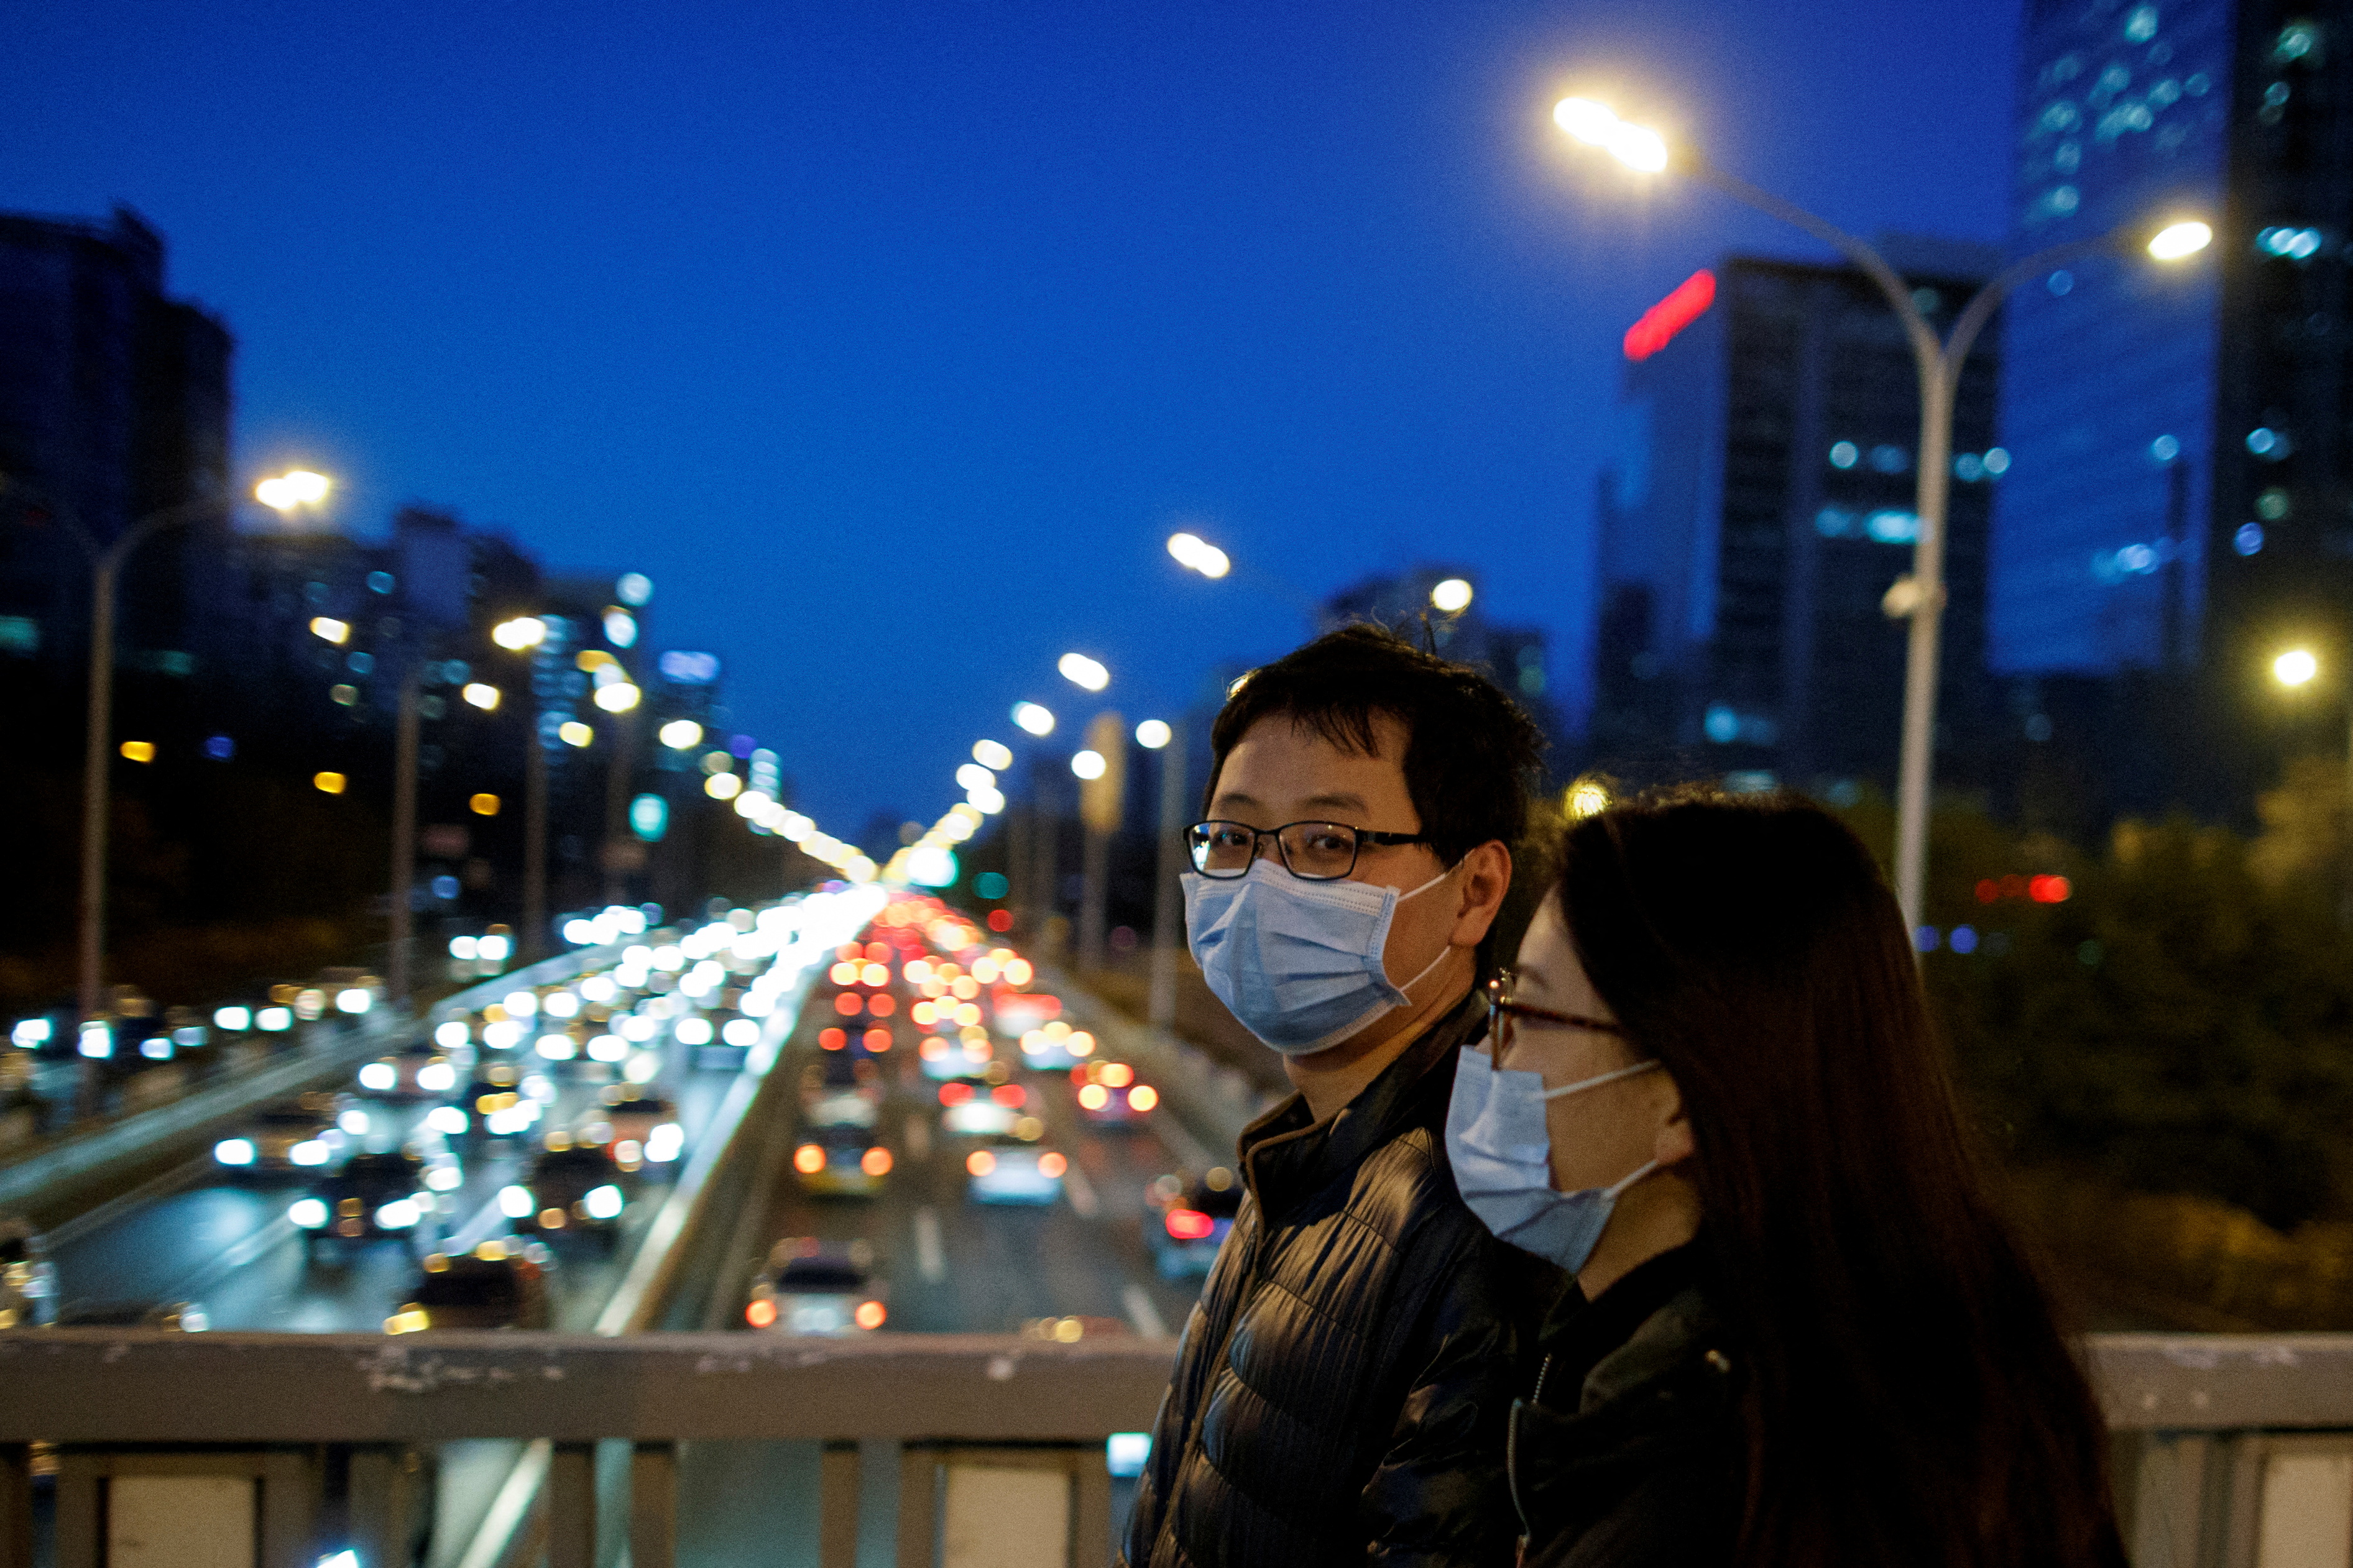 People cross a bridge over a major thoroughfare that is clogged with slow moving traffic during evening rush hour, as the country is hit by an outbreak of the novel coronavirus, in Beijing, China, March 3, 2020. REUTERS/Thomas Peter/File Photo